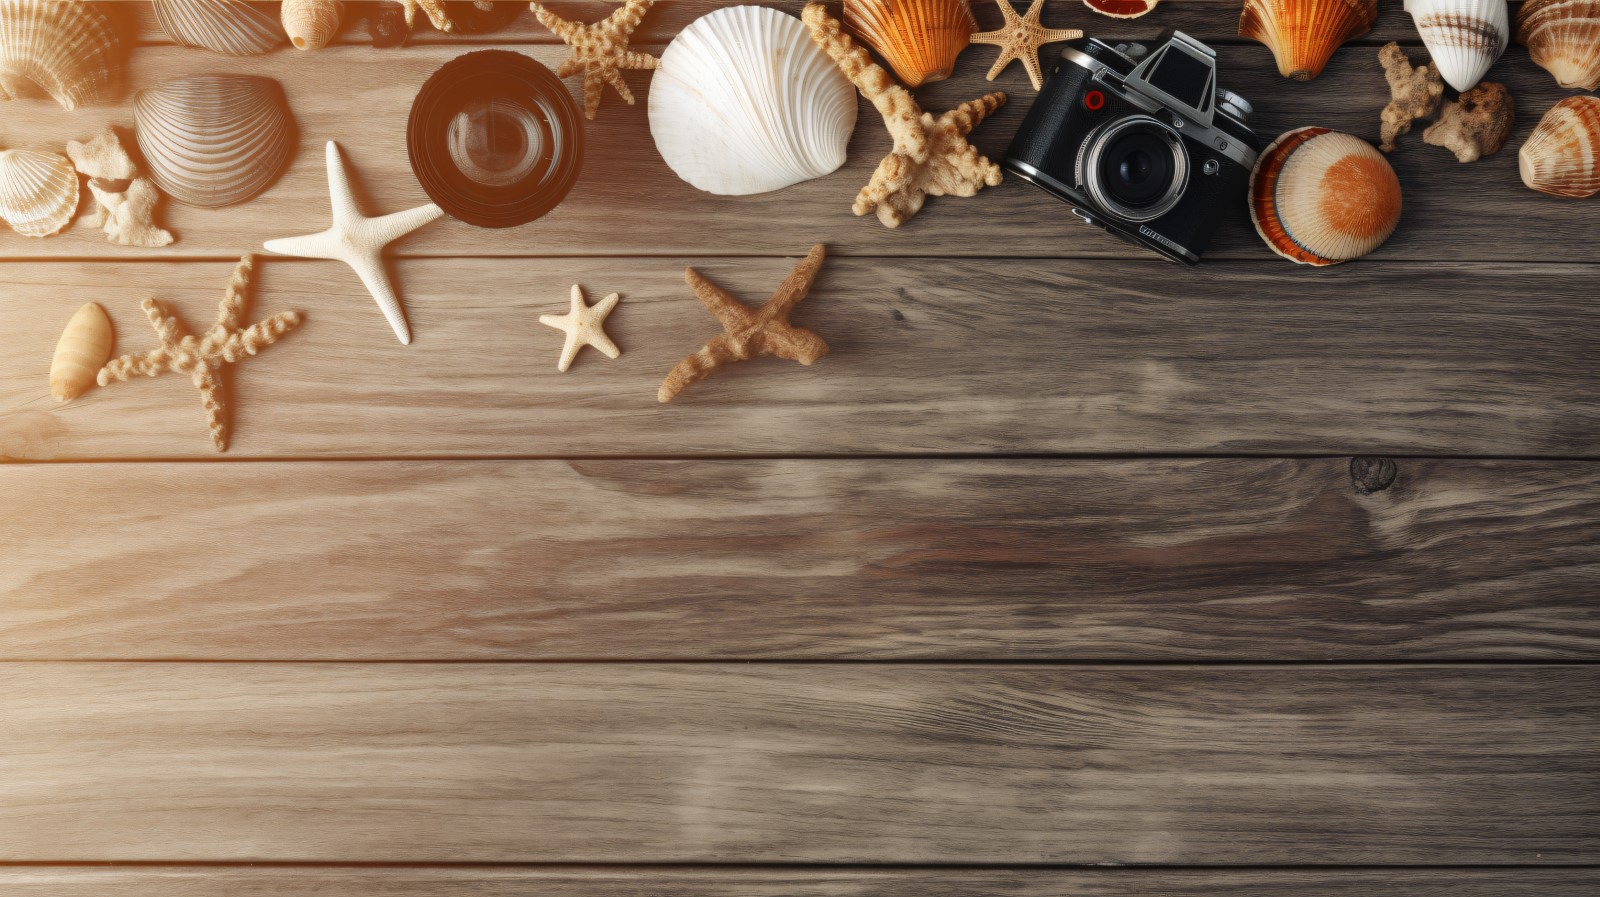 Beach accessories starfish and seashell on wooden background 206